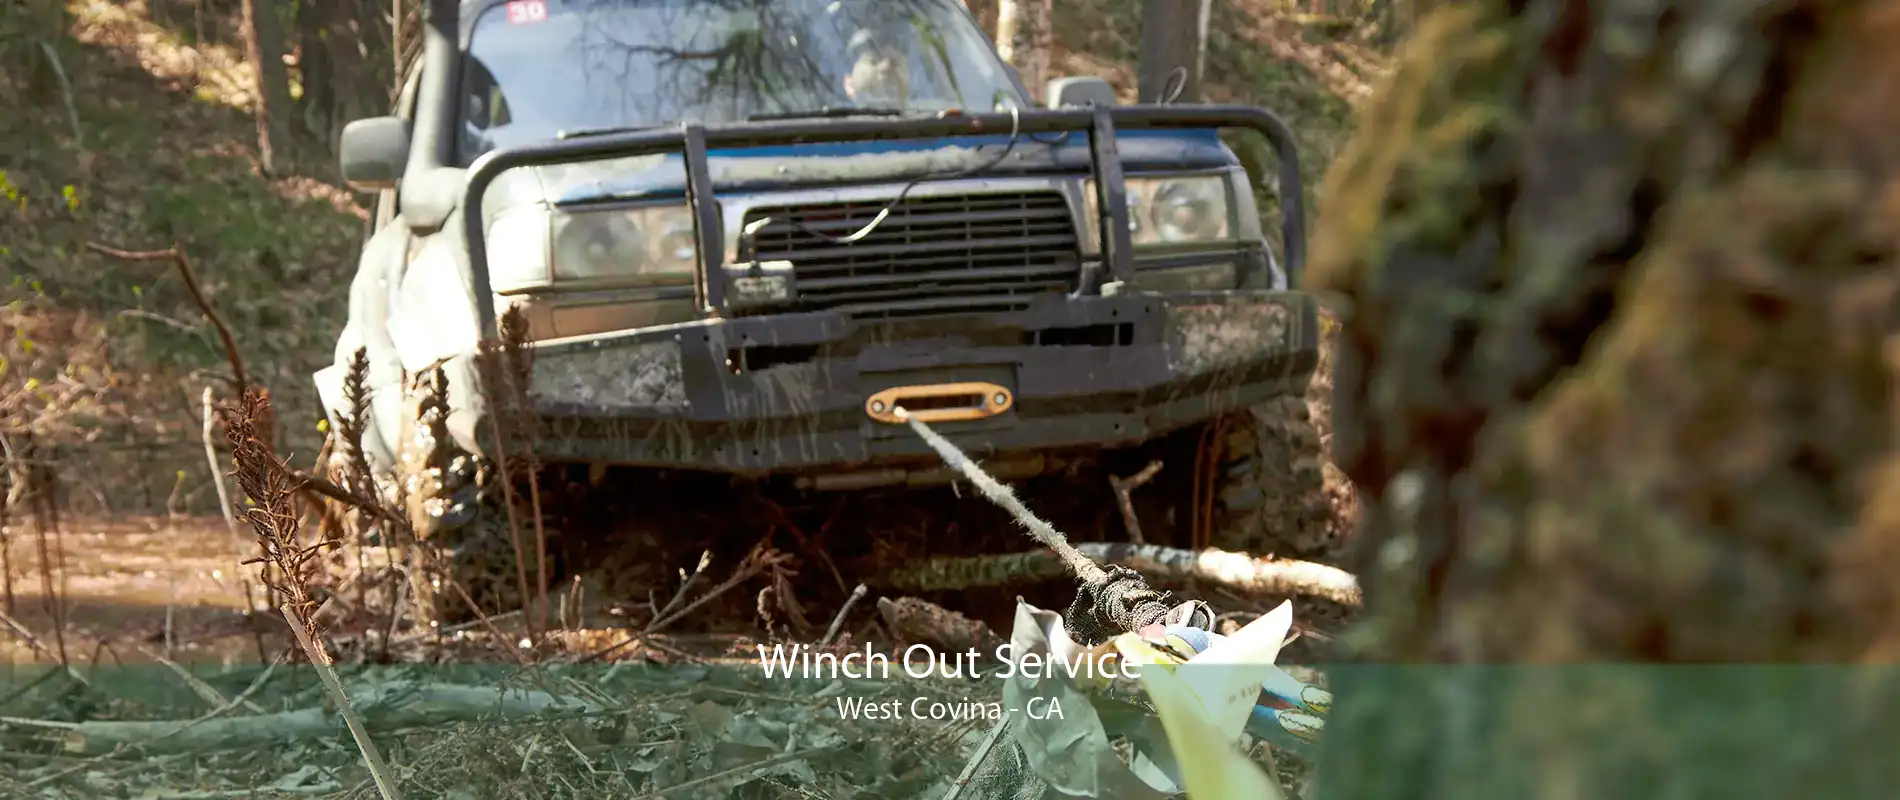 Winch Out Service West Covina - CA